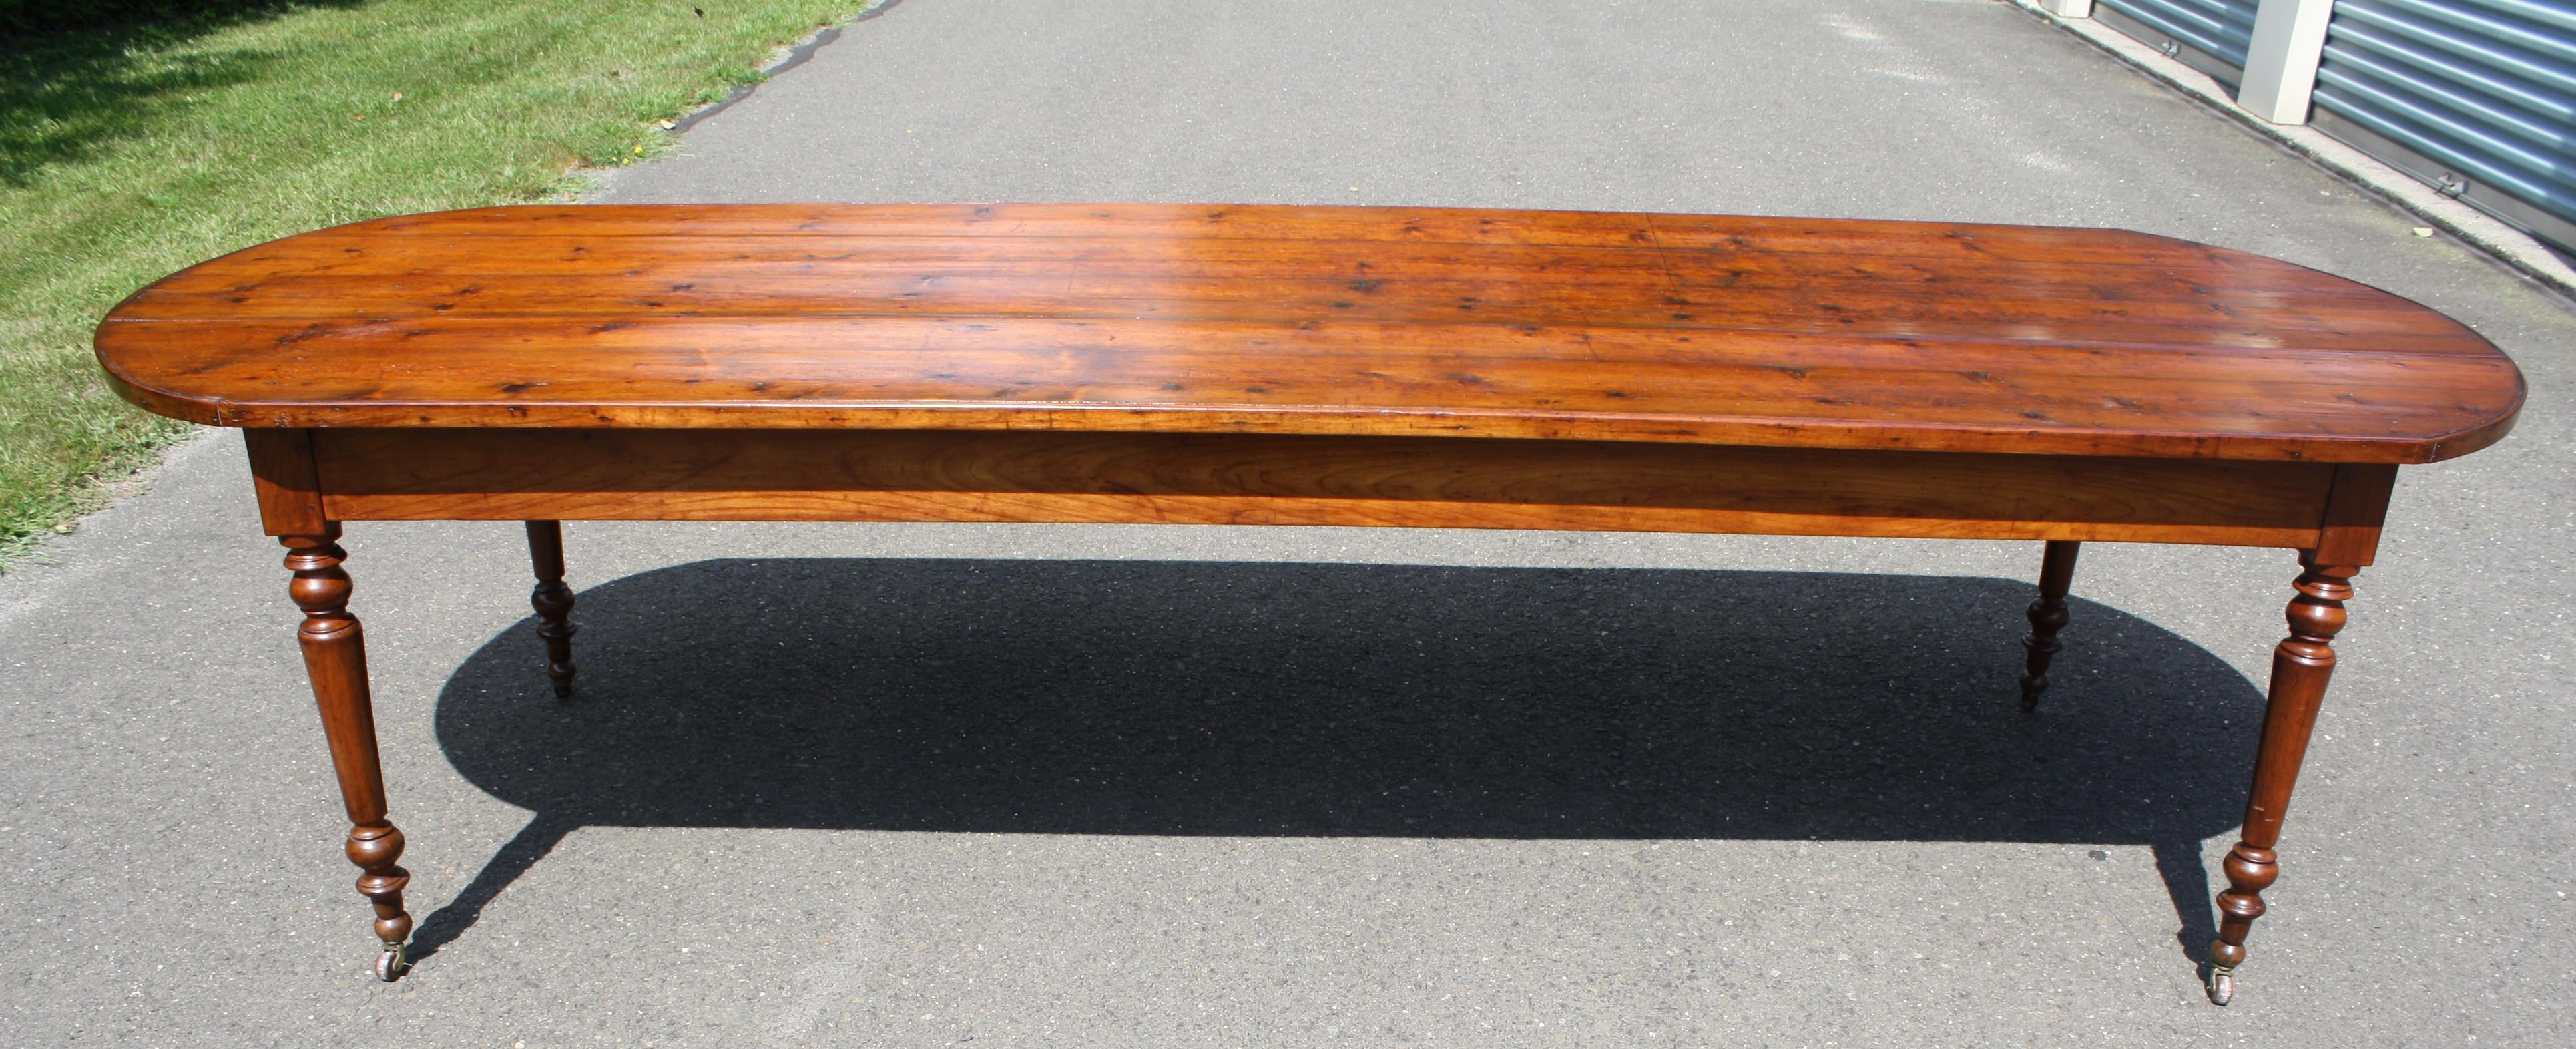 American Craftsman Knotted Pine Planked 'Demi-Ended' Farm Table For Sale